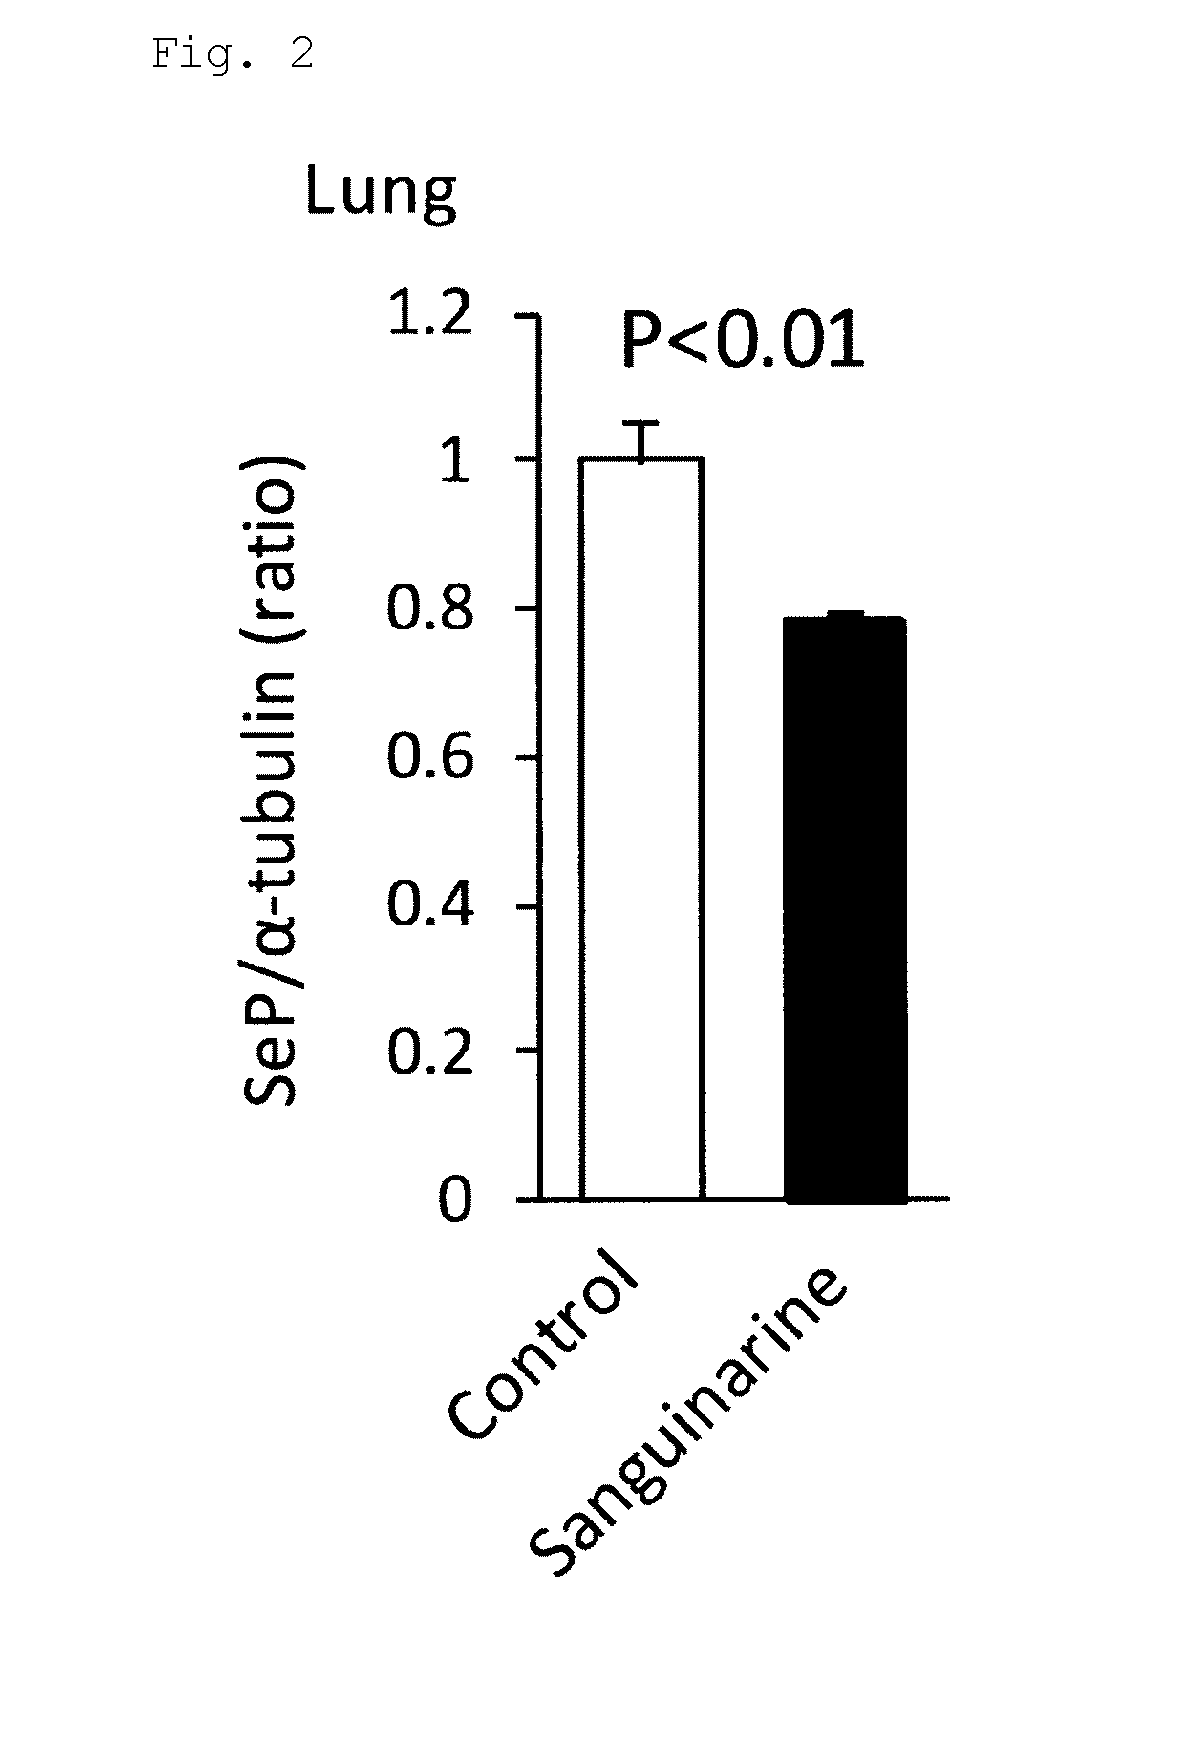 Pulmonary hypertension preventative or therapeutic agent containing component exhibiting selenoprotein p activity-inhibiting effect